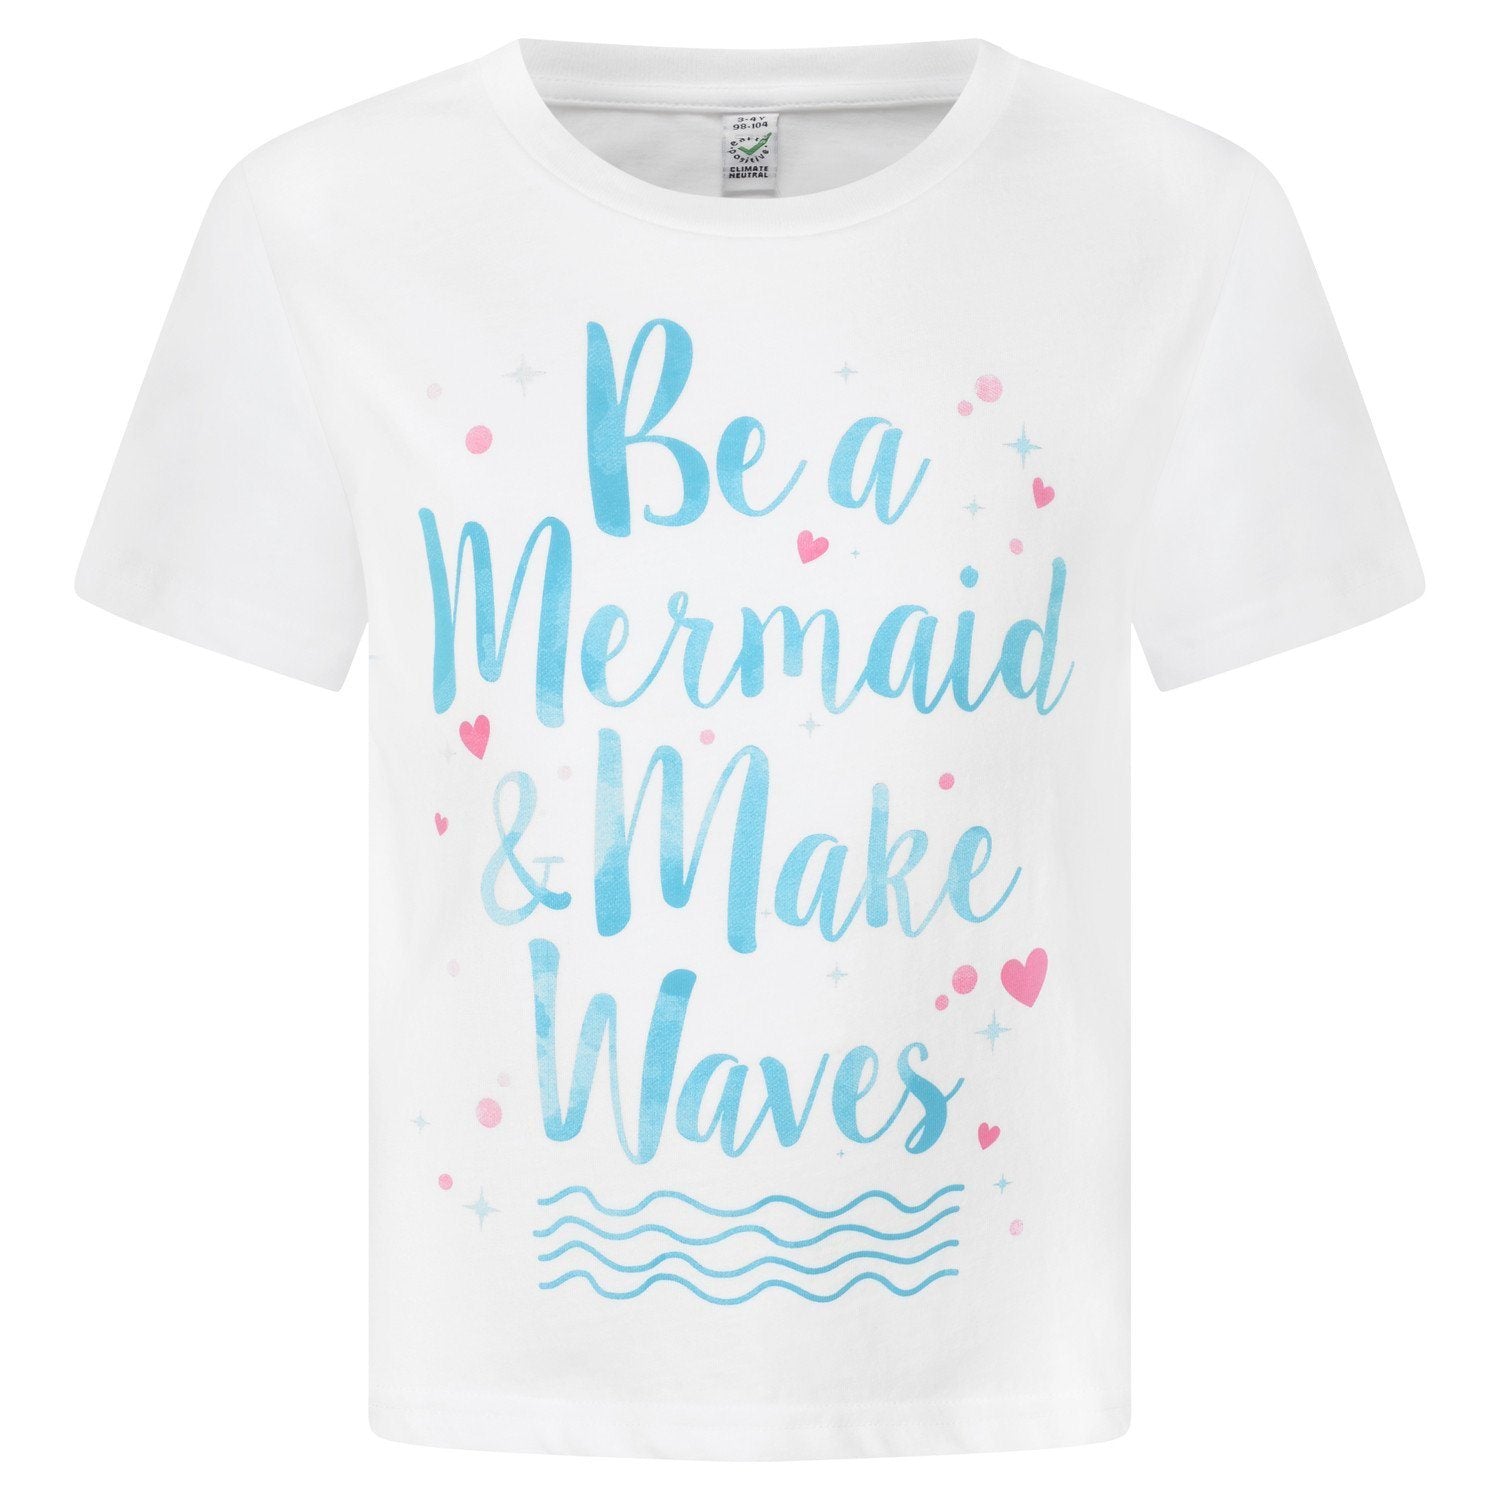 "Be a Mermaid and Make Waves" Girls White Cotton T-shirt Front